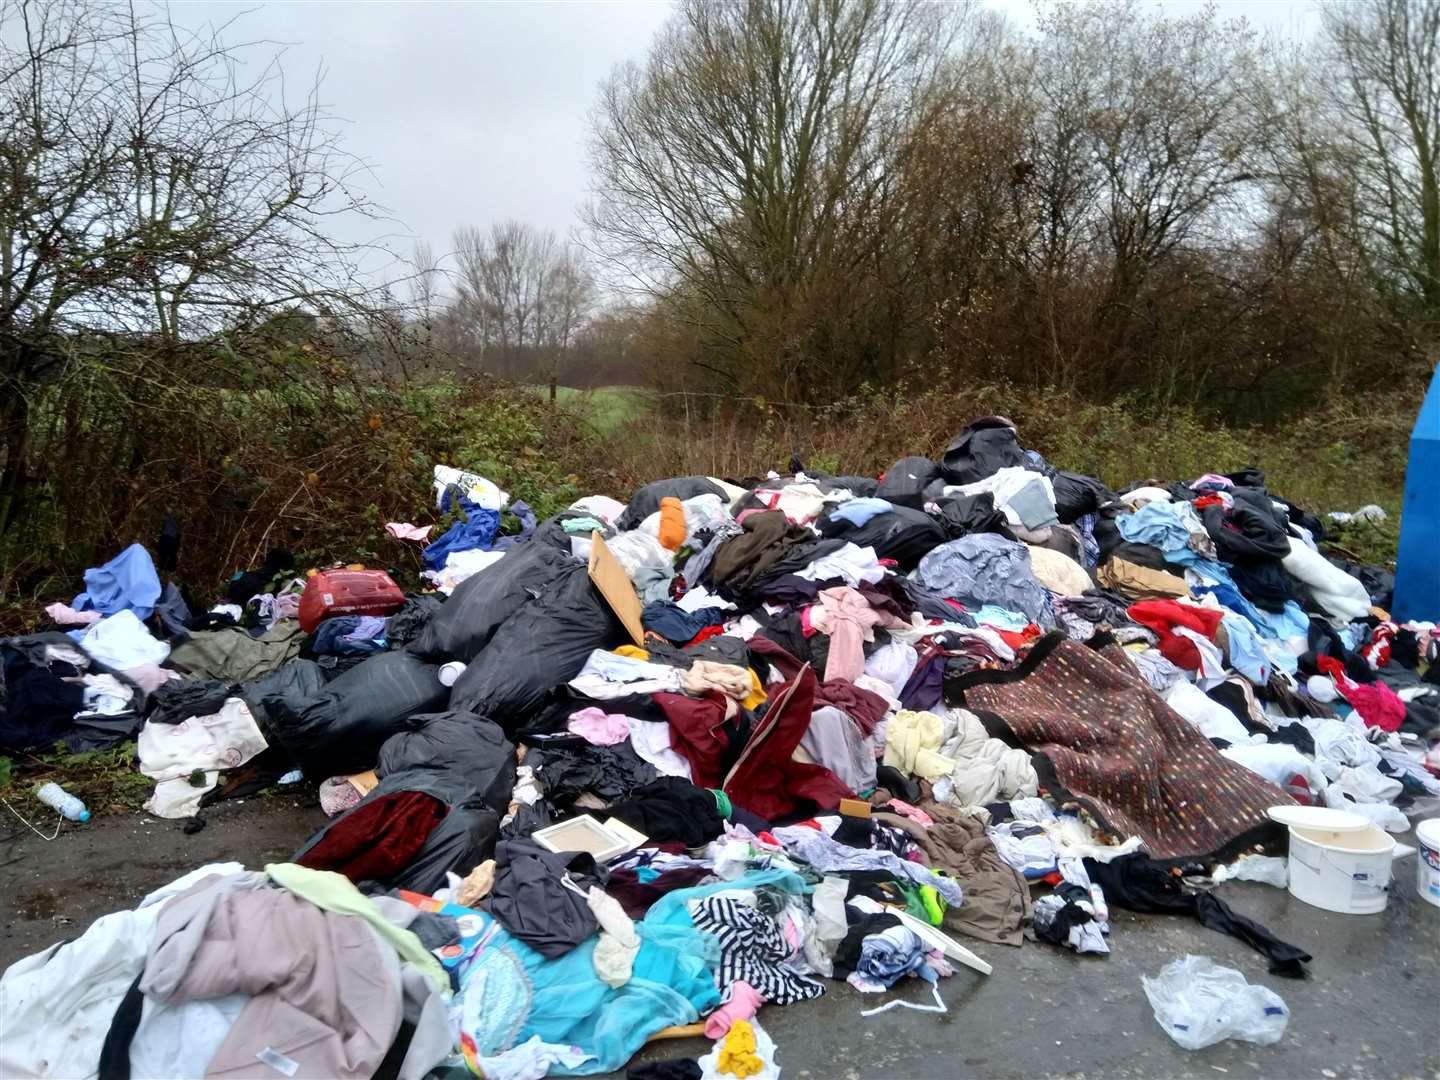 Large-scale flytipping problems prompted Dartford council to take action and council leader Jeremy Kite has previously led calls for tougher sentencing powers